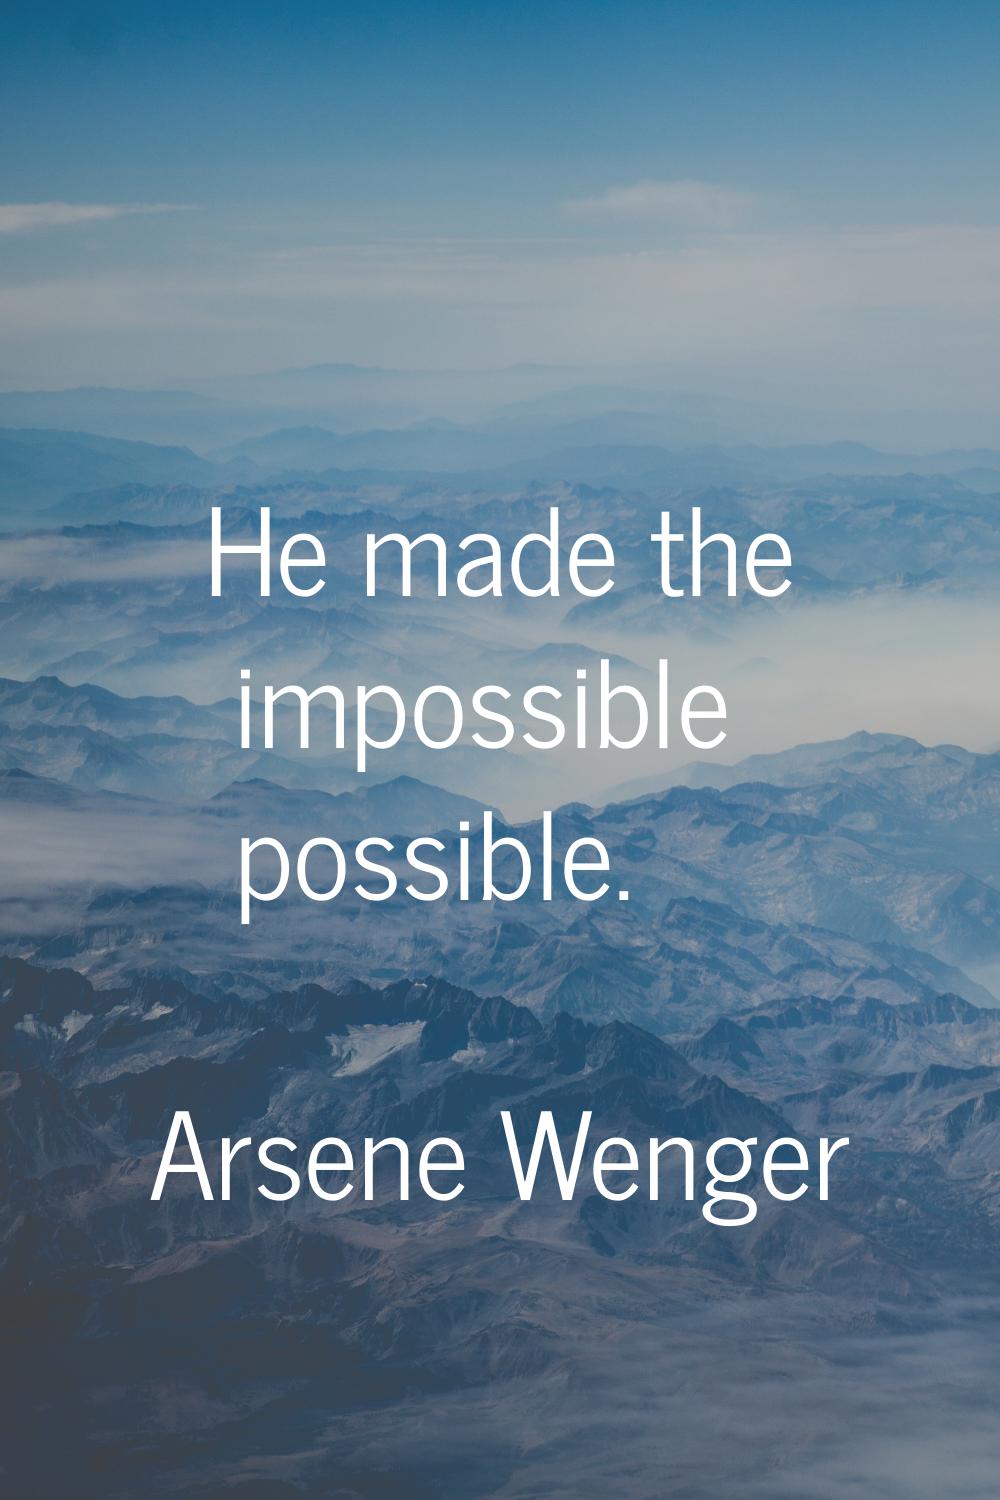 He made the impossible possible.